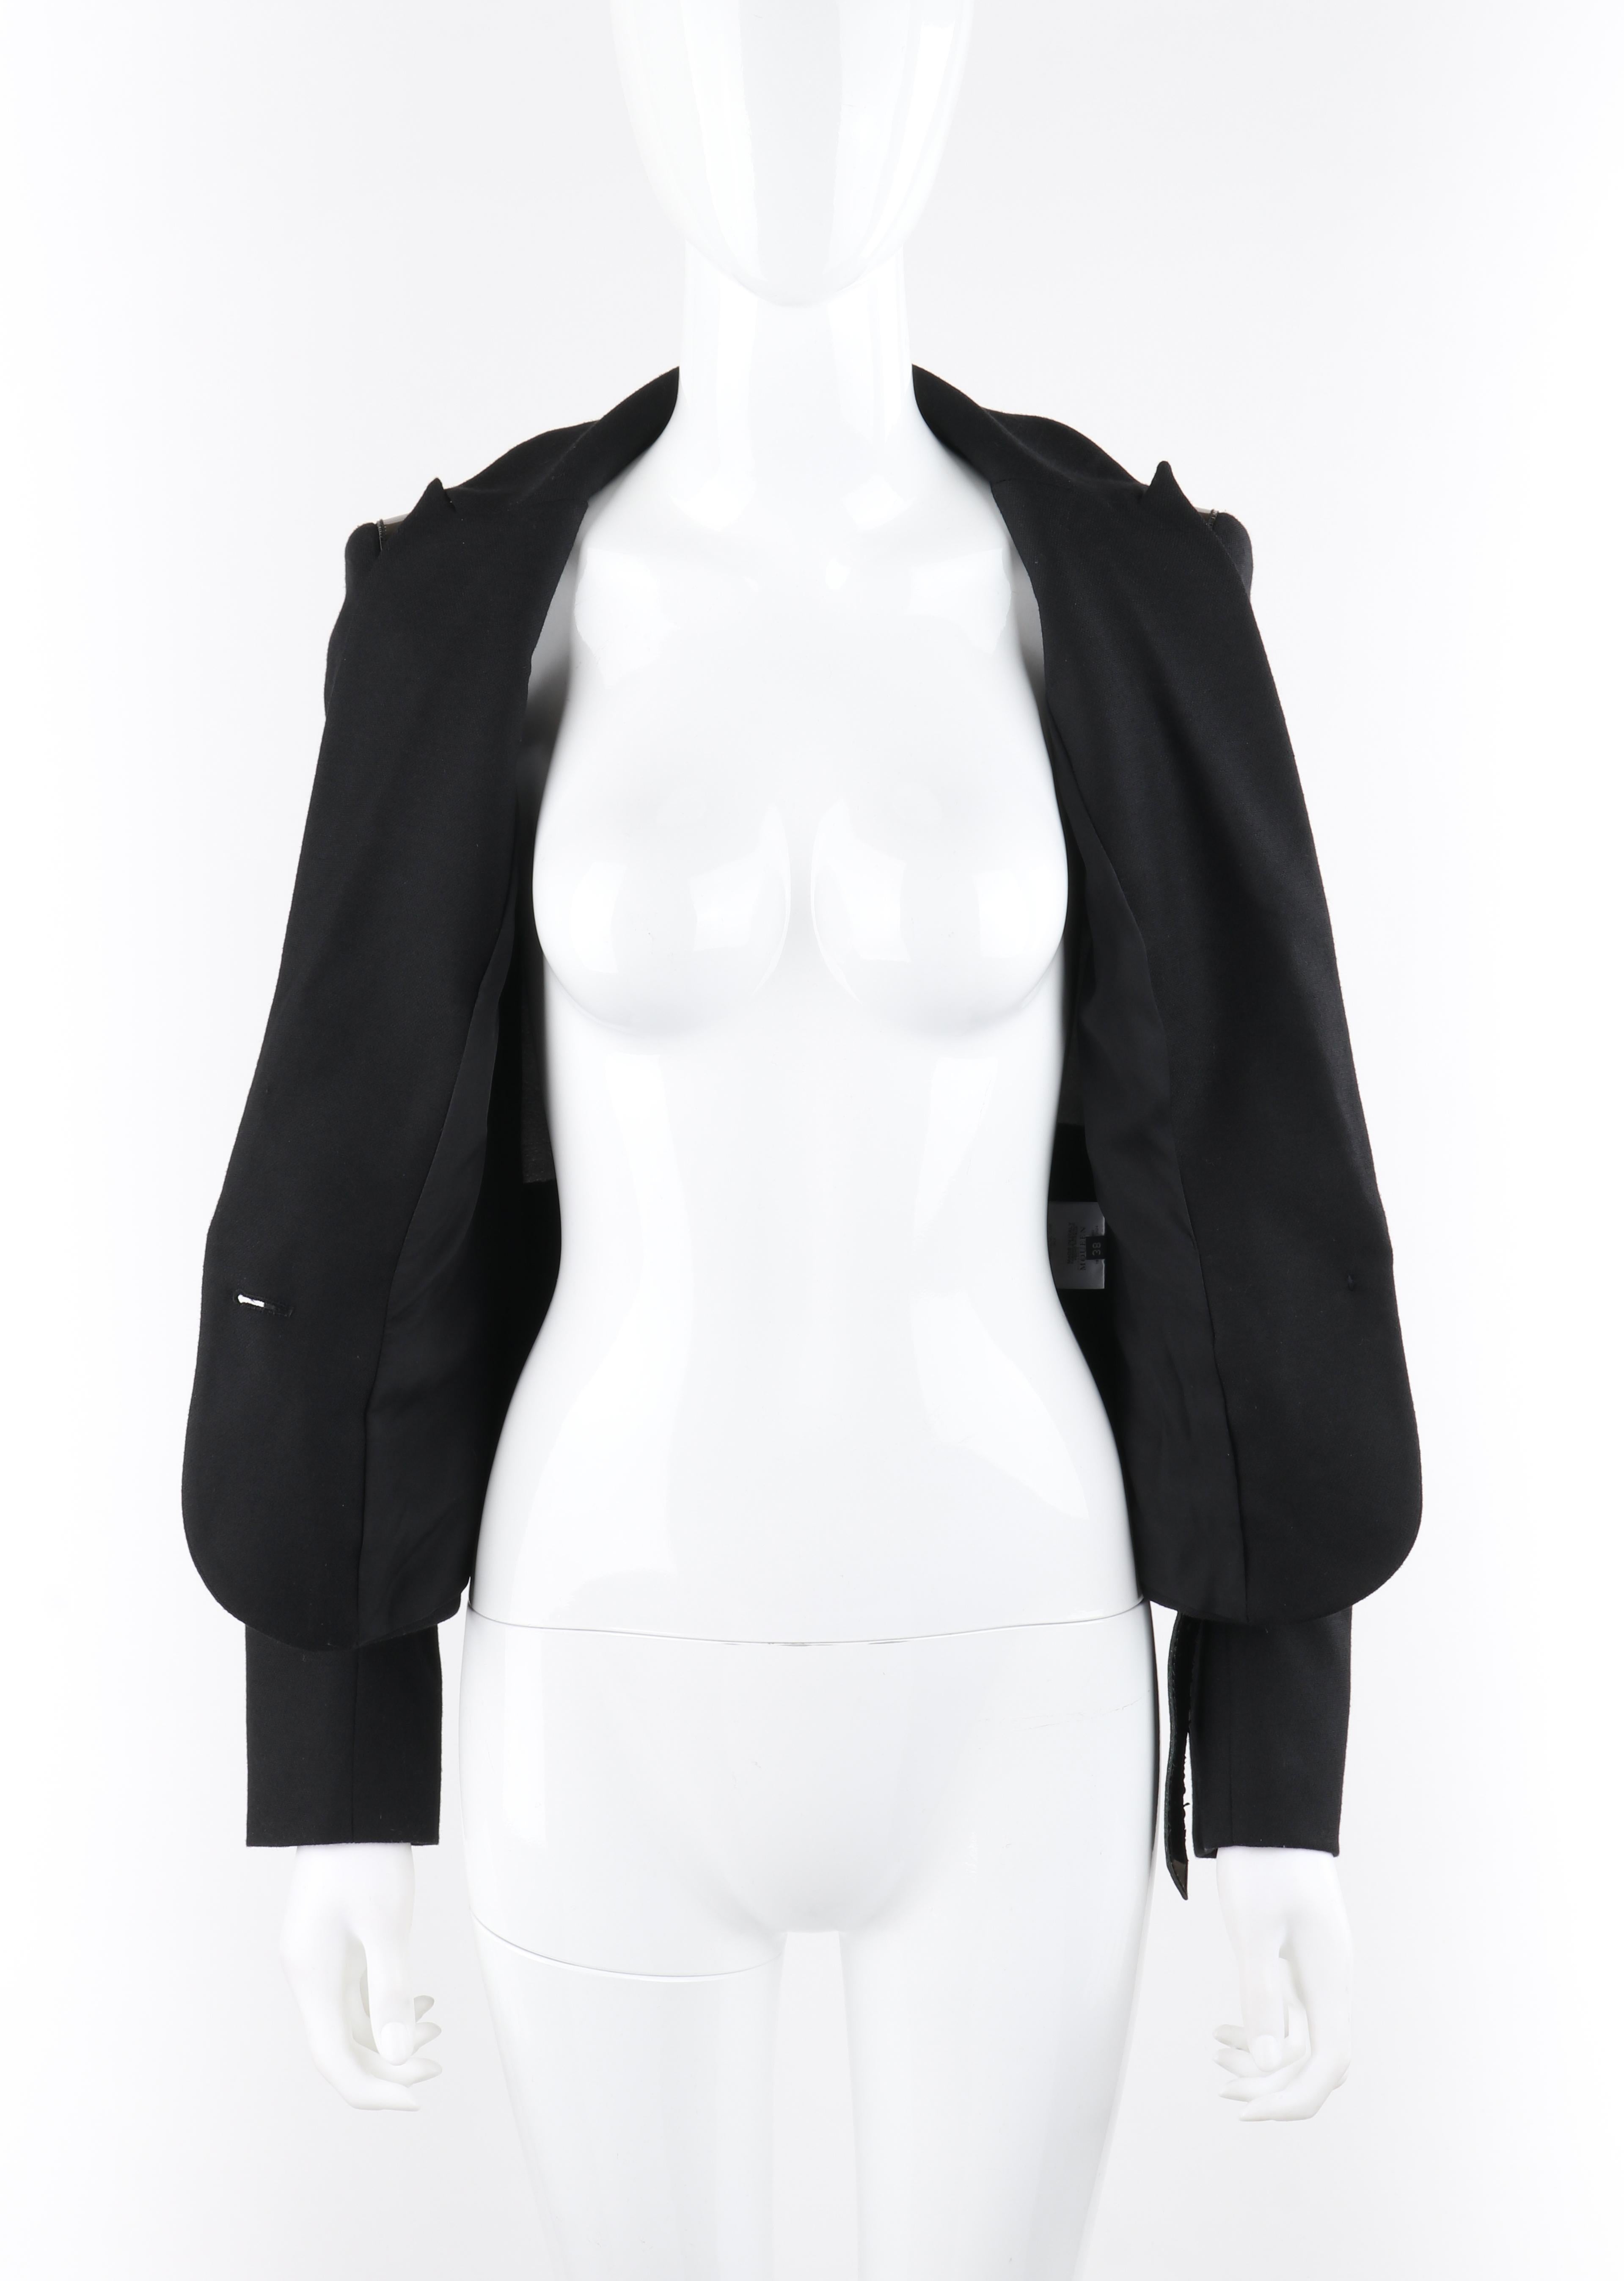 ALEXANDER McQUEEN A/W 2007 “Witches” Black Patent Leather Belted Blazer Jacket In Good Condition For Sale In Thiensville, WI